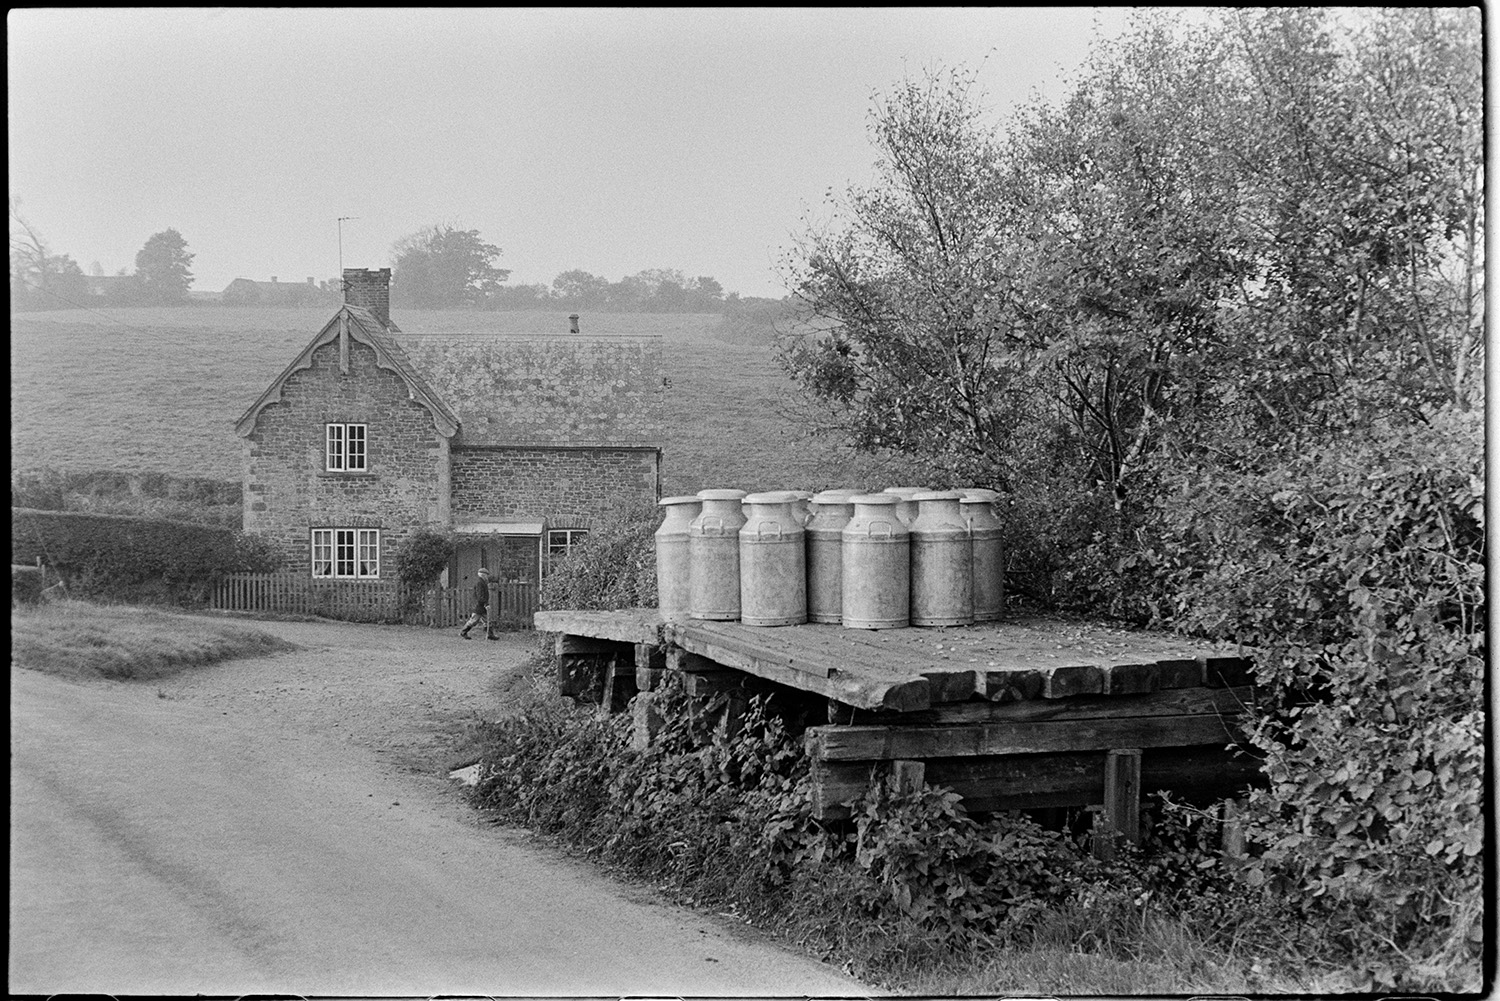 Milk churns on stand. 
[Milk churns on a wooden milk churn stand waiting to be collected at Hallcourt, Petrockstowe. A person is walking past a house in the background.]